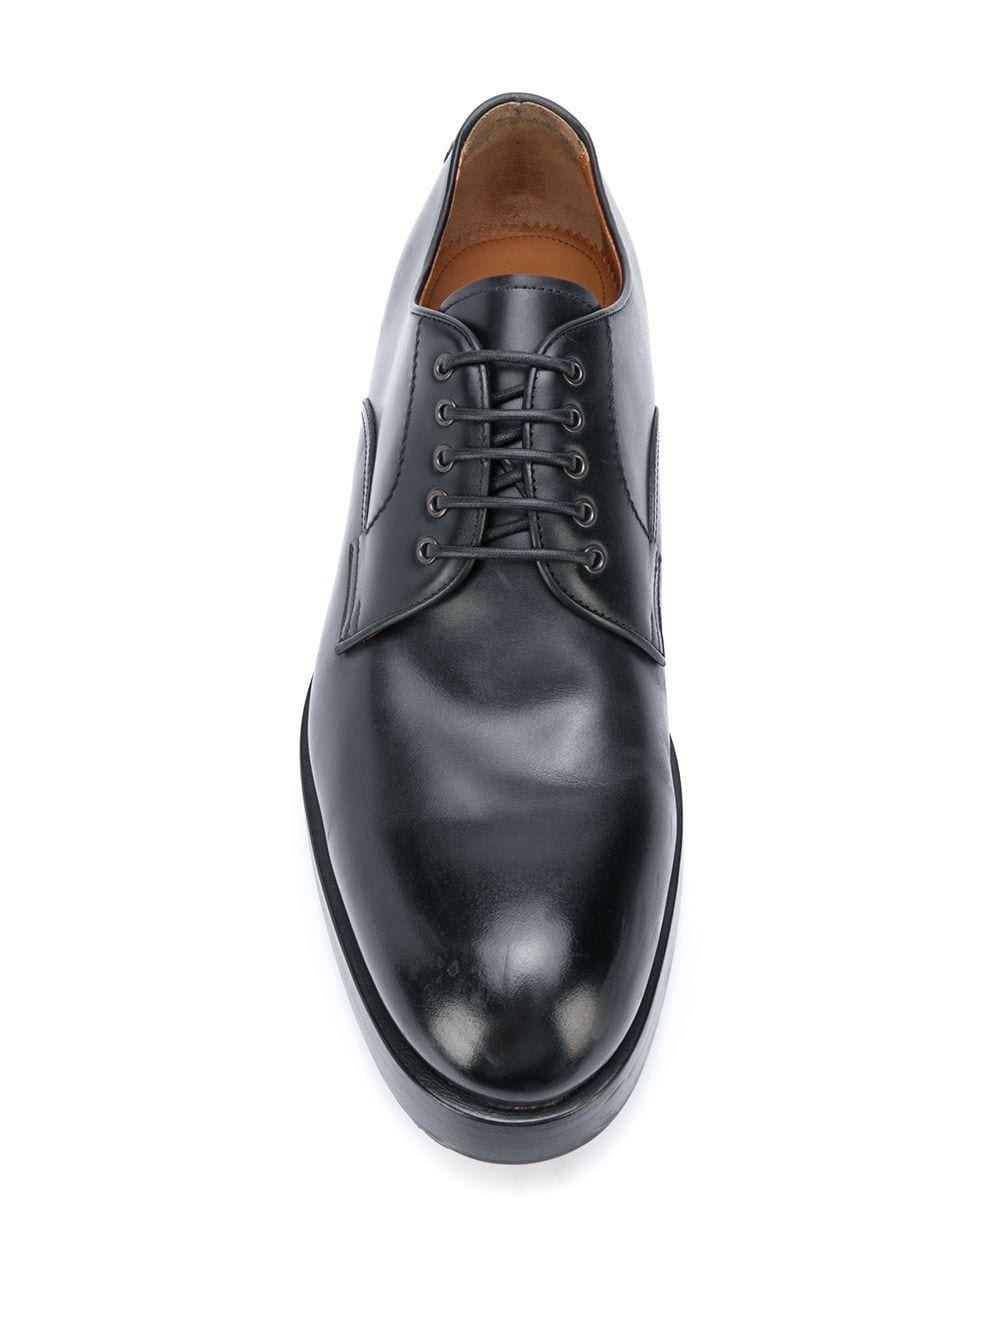 Udine Leather Derby Shoes in Black - Zegna